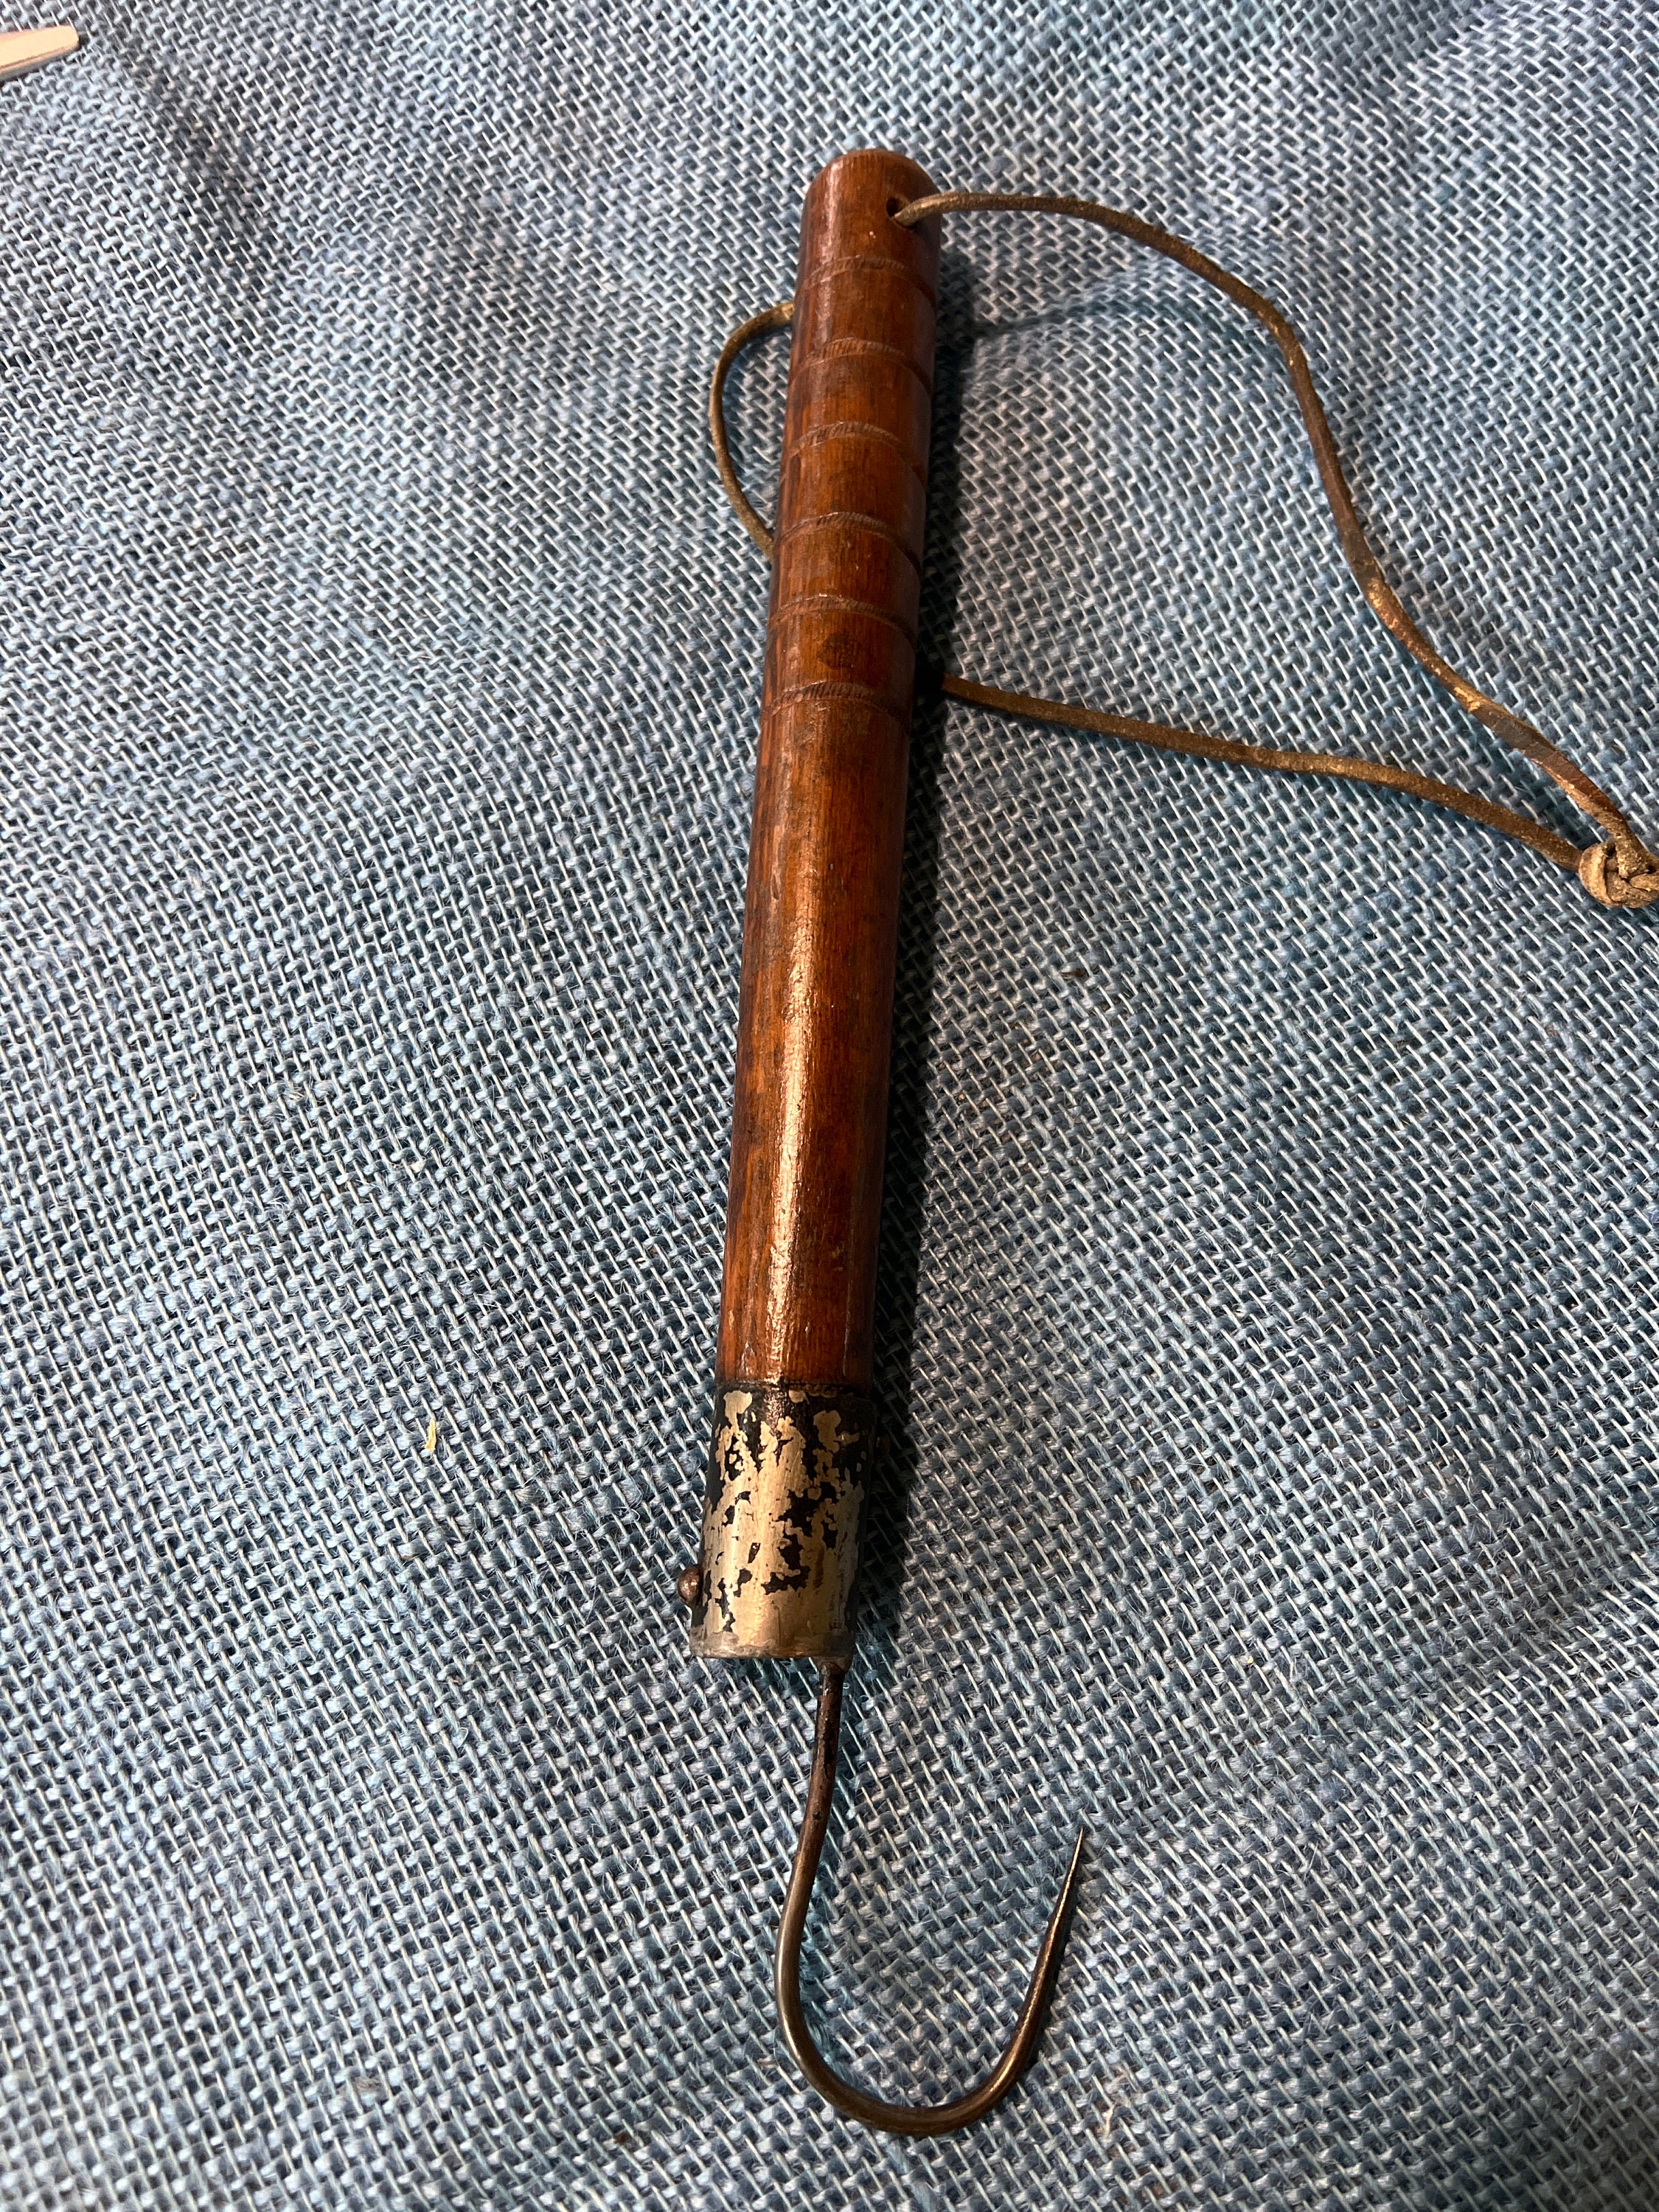 Vintage Gaff Fishing Gaff With Wood Handle Leather Wrist Strap